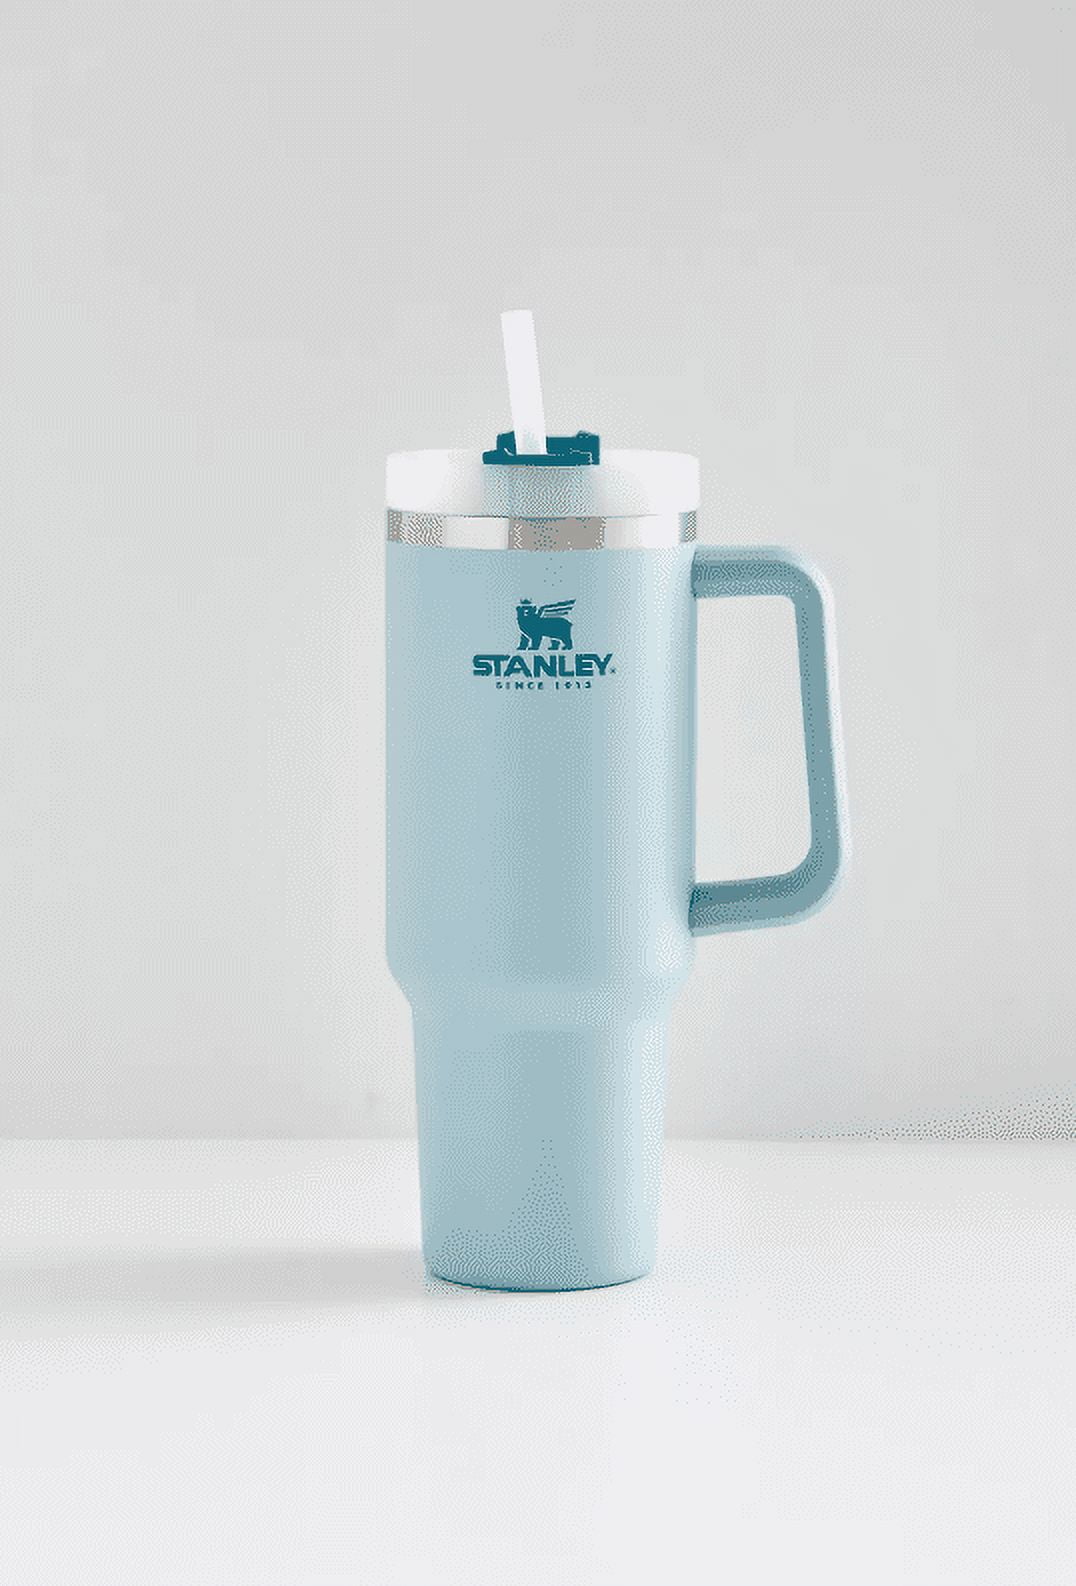 Scheels - *UPDATE: Abalone and Sea-Foam sold out* Stanley Quencher Tumblers  are IN STOCK NOW! Get one while they're here! 🤩 *LIMIT OF 3 PER CUSTOMER*  Available in store and for BOPIS (